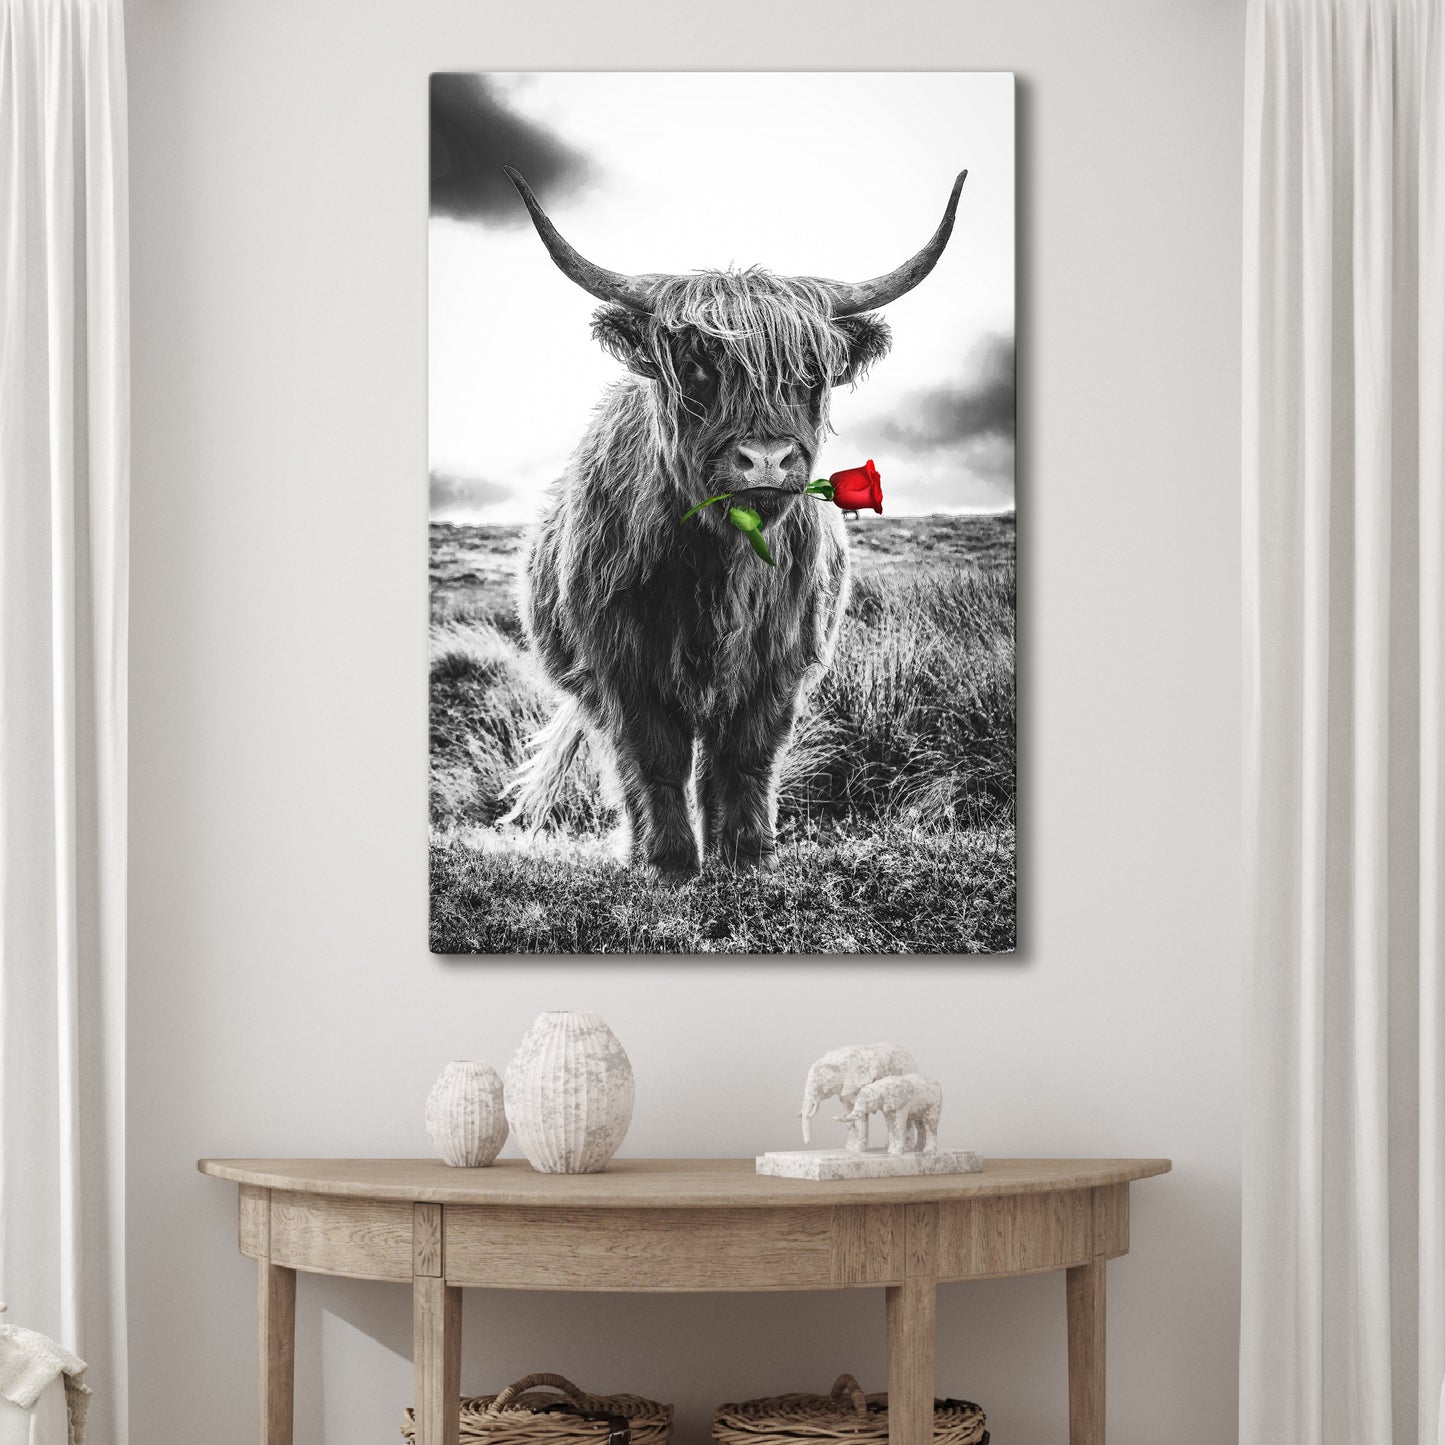 Freedom Highland Cow Rose Canvas Wall Art - Image by Tailored Canvases